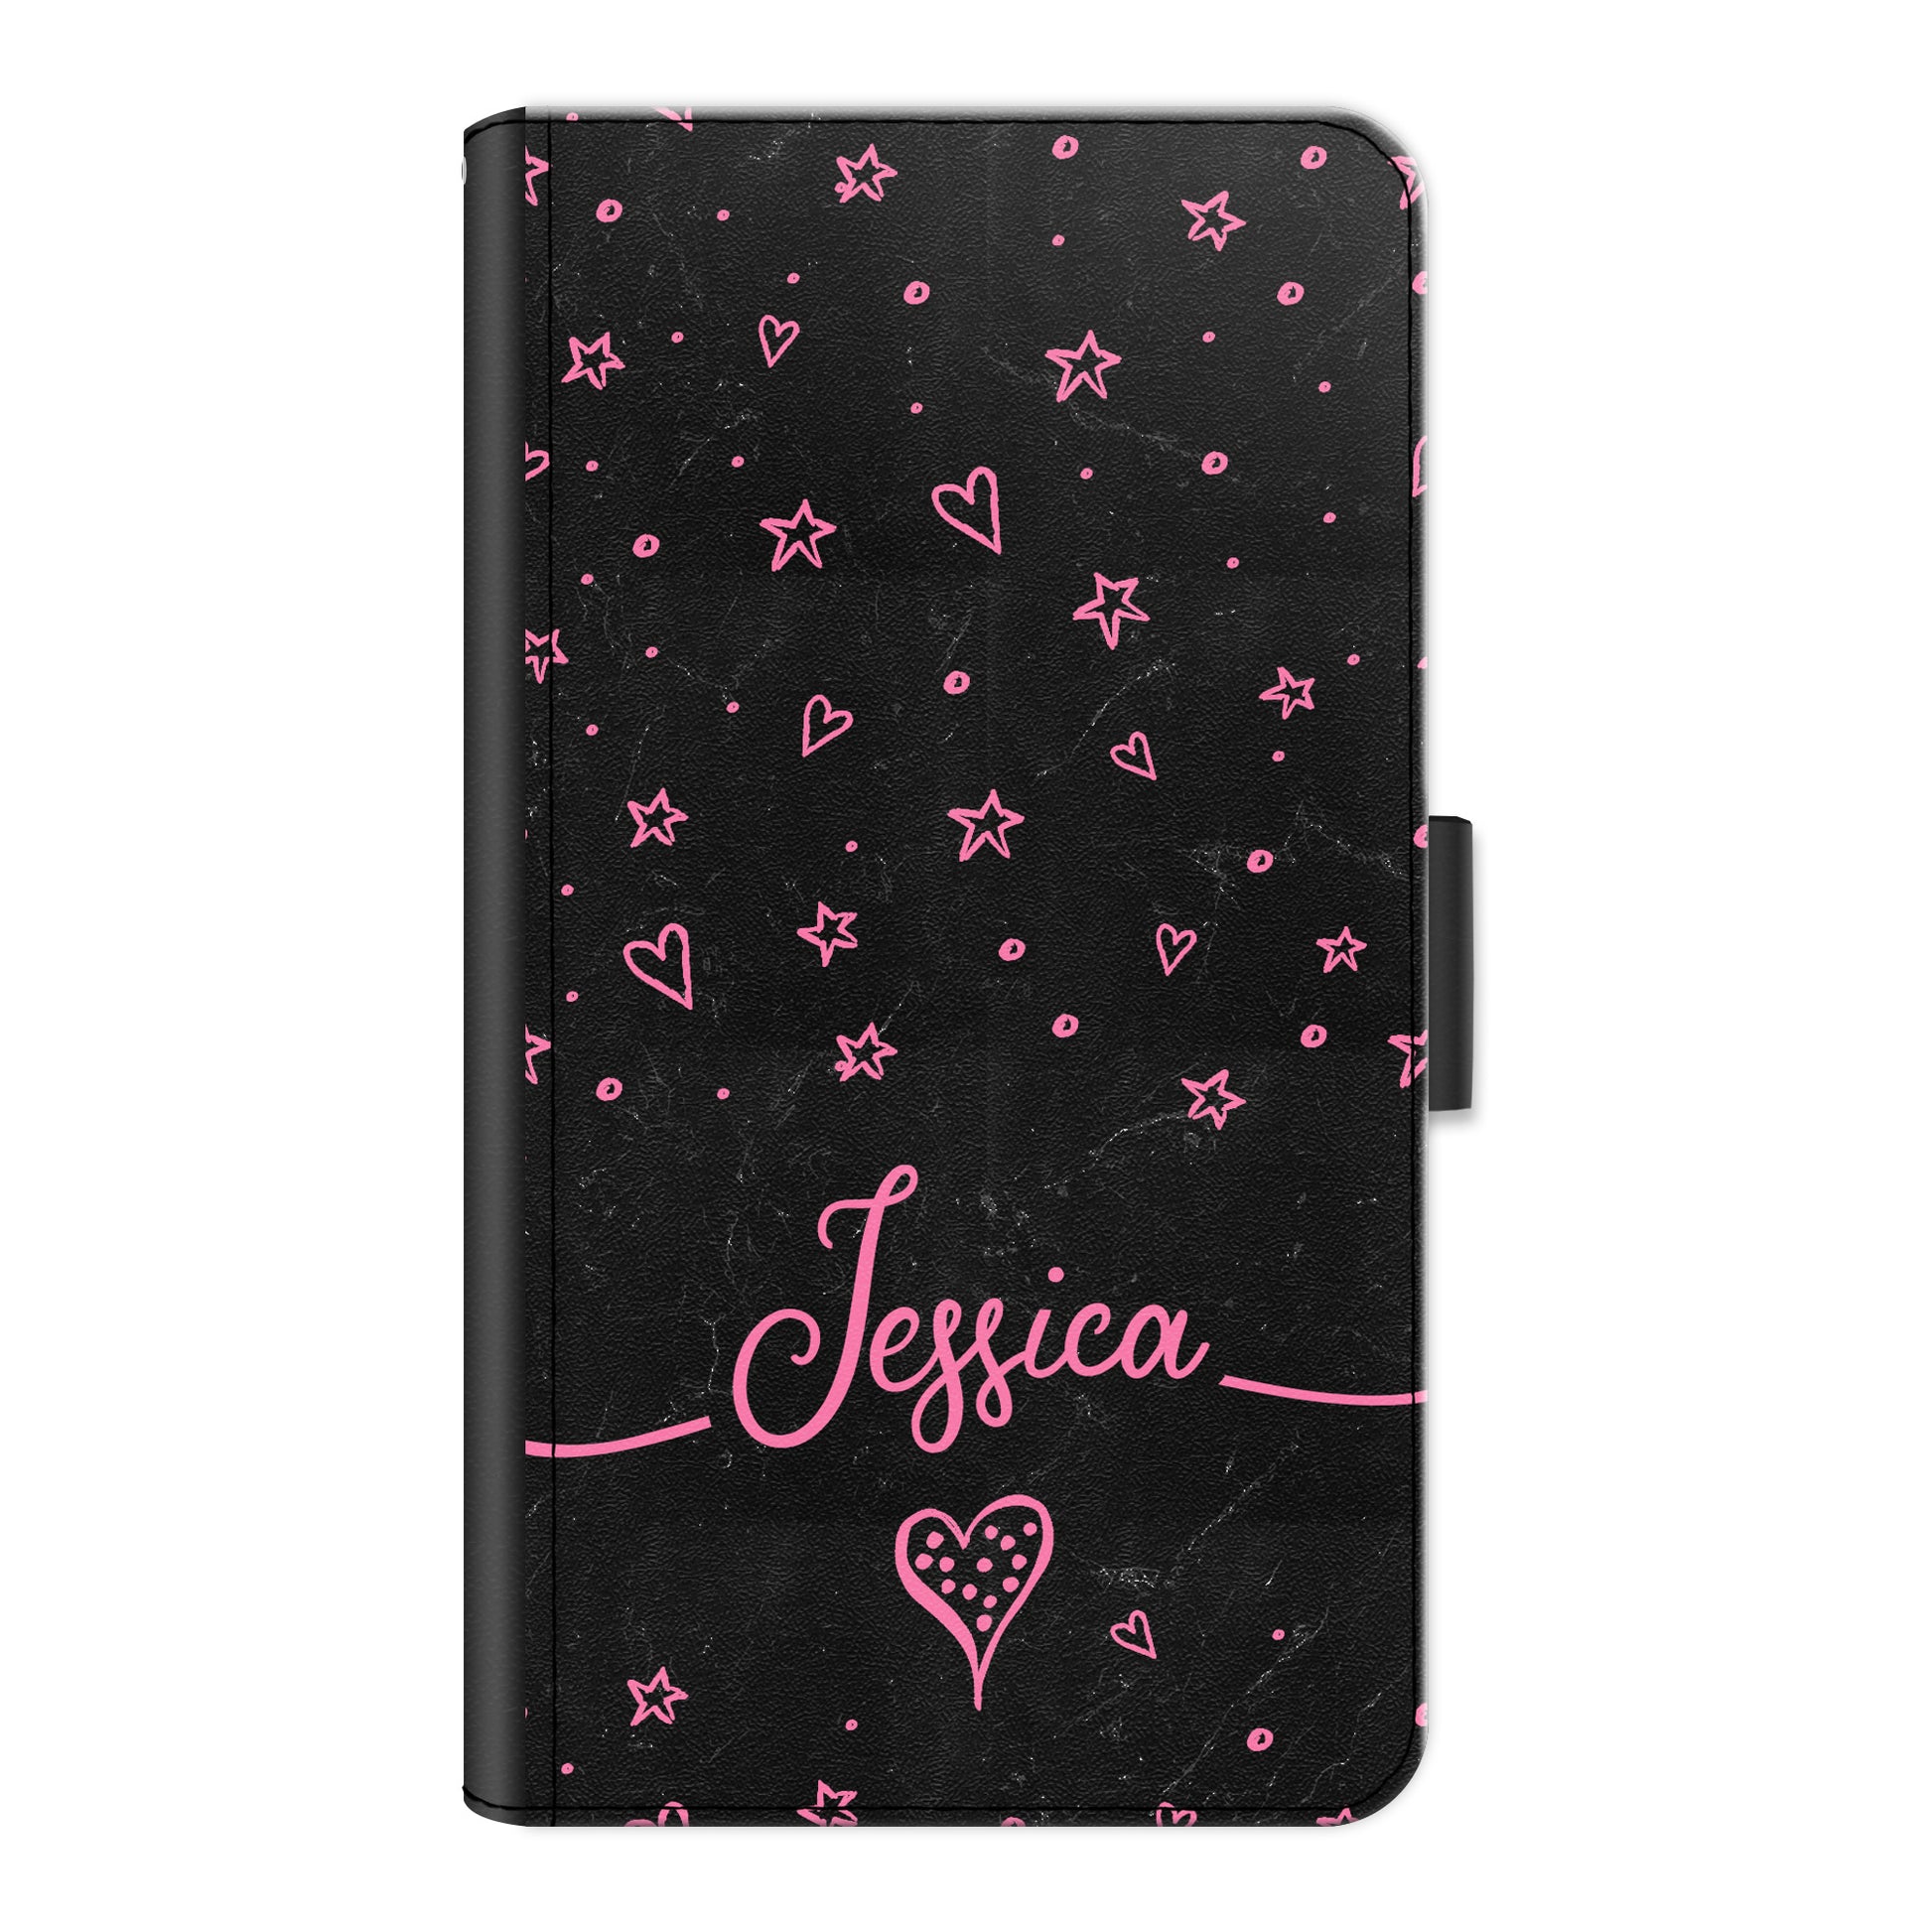 Personalised Oppo Phone Leather Wallet with Pink Stylish text, Stars and Hearts on Black Marble